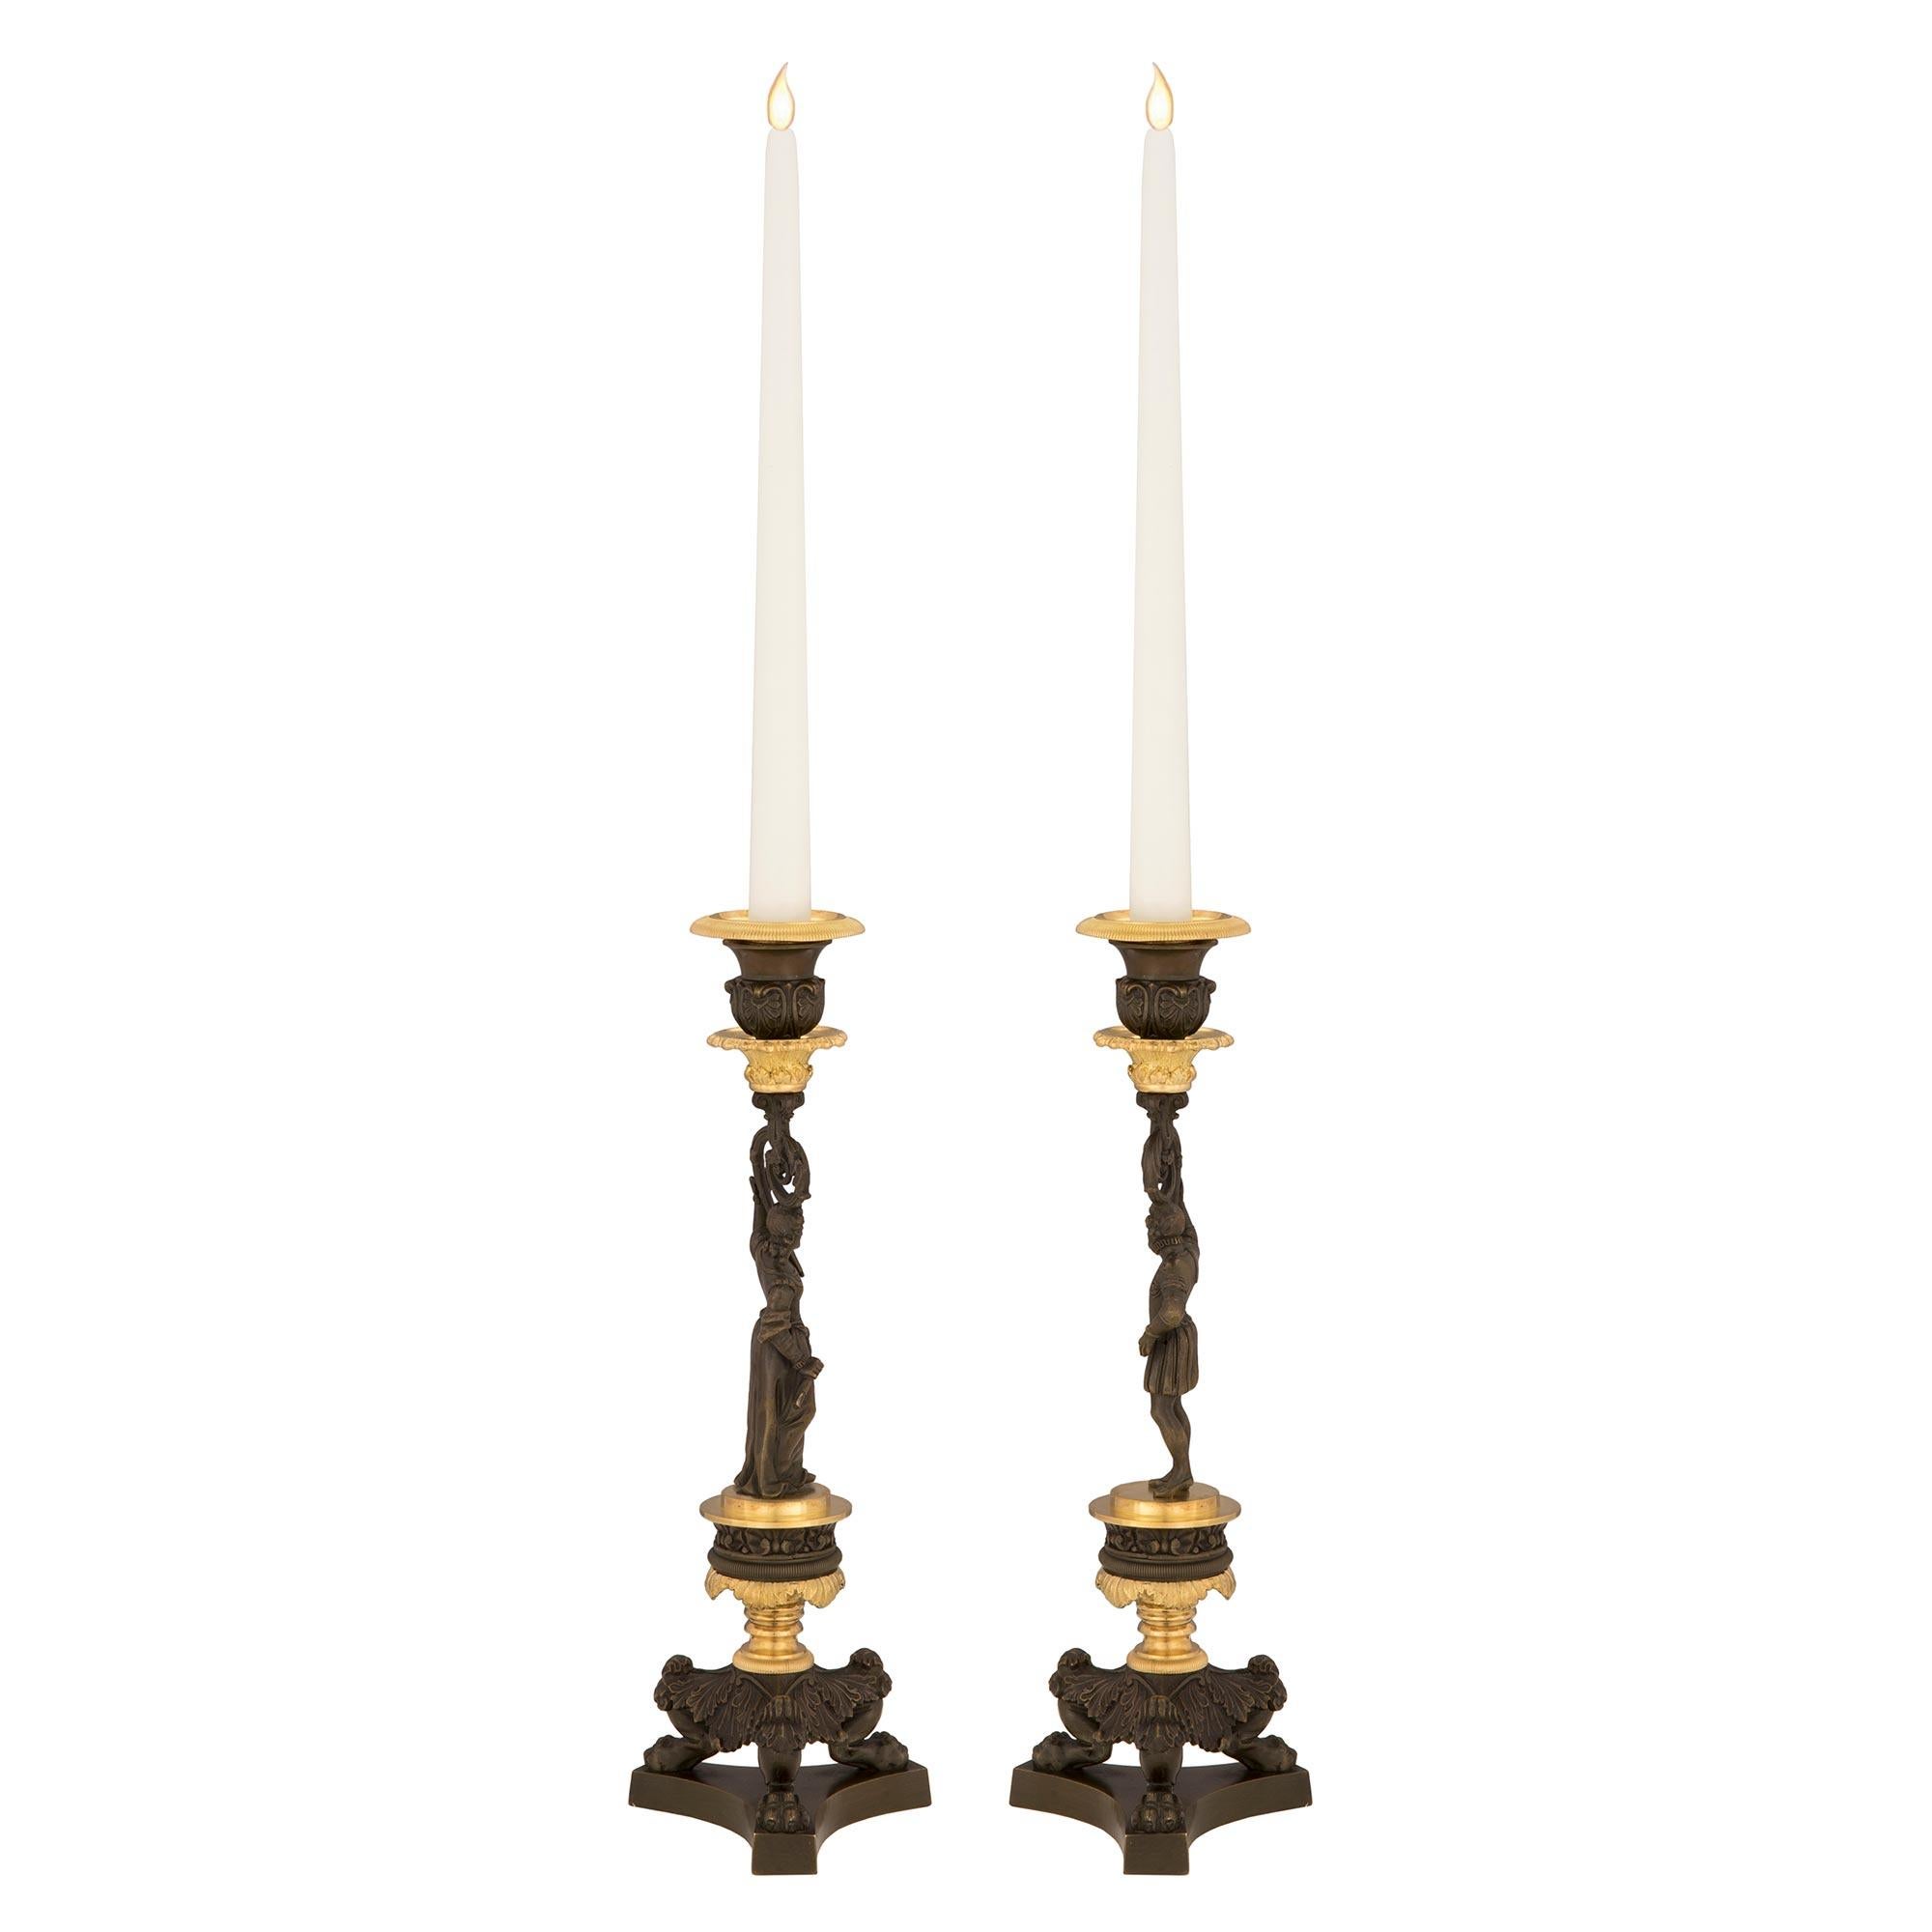 Pair of French 19th Century Charles X Style Bronze and Ormolu Candlesticks In Good Condition For Sale In West Palm Beach, FL